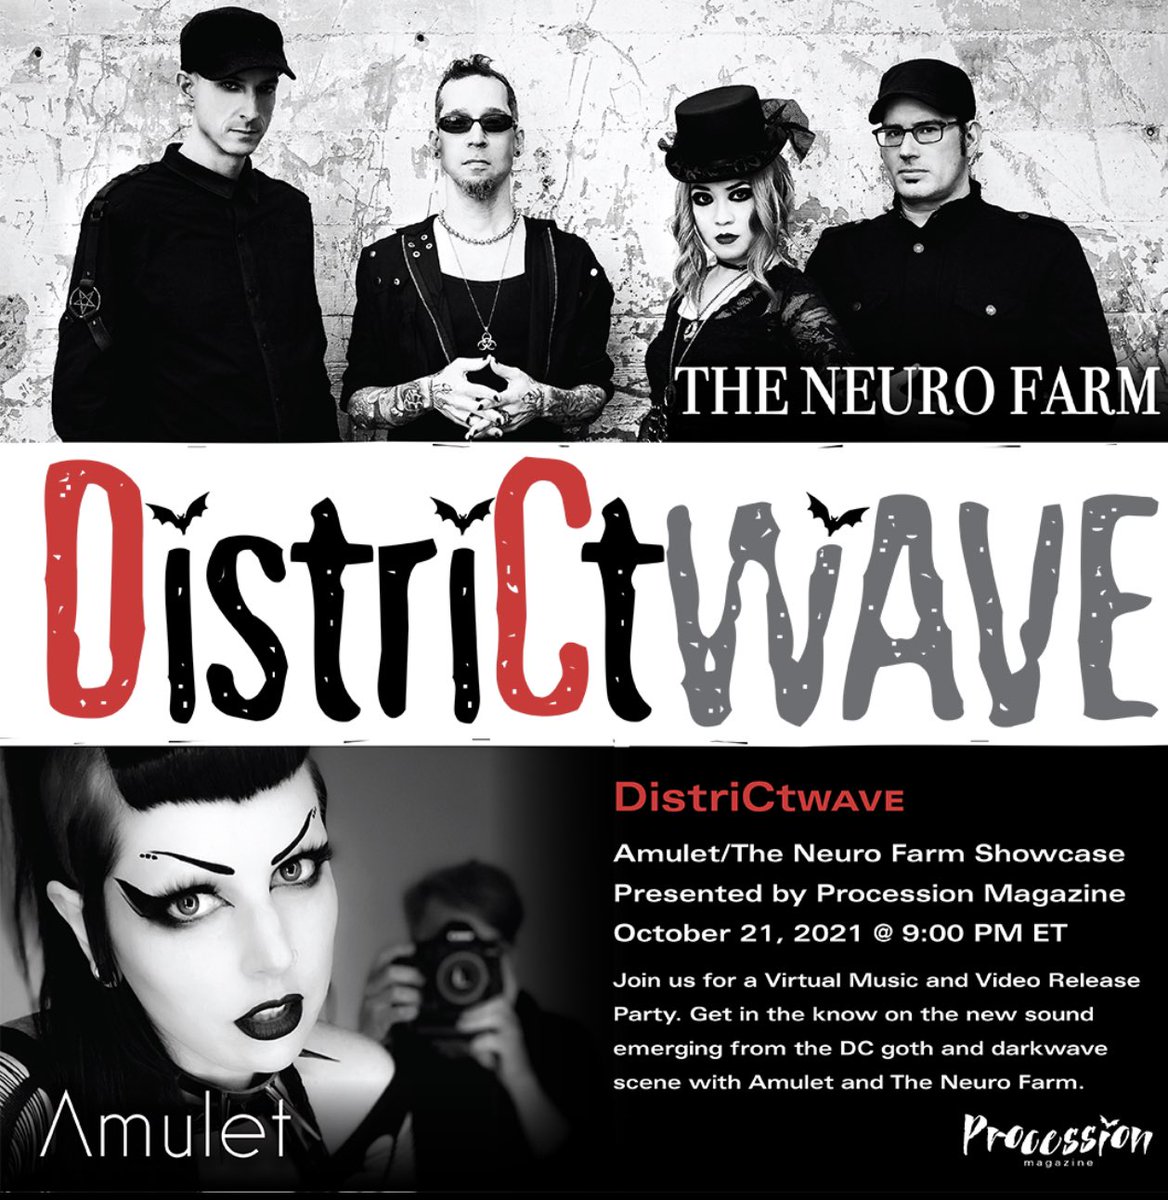 Presenting DistriCtWAVE. Two amazing bands, Amulet and @theneurofarm, are coming together to debut their extraordinary new releases. On 𝗢𝗰𝘁𝗼𝗯𝗲𝗿 𝟮𝟭, both bands will be releasing material you won’t forget on an exclusive live stream. Register at: eventbrite.com/e/districtwave…